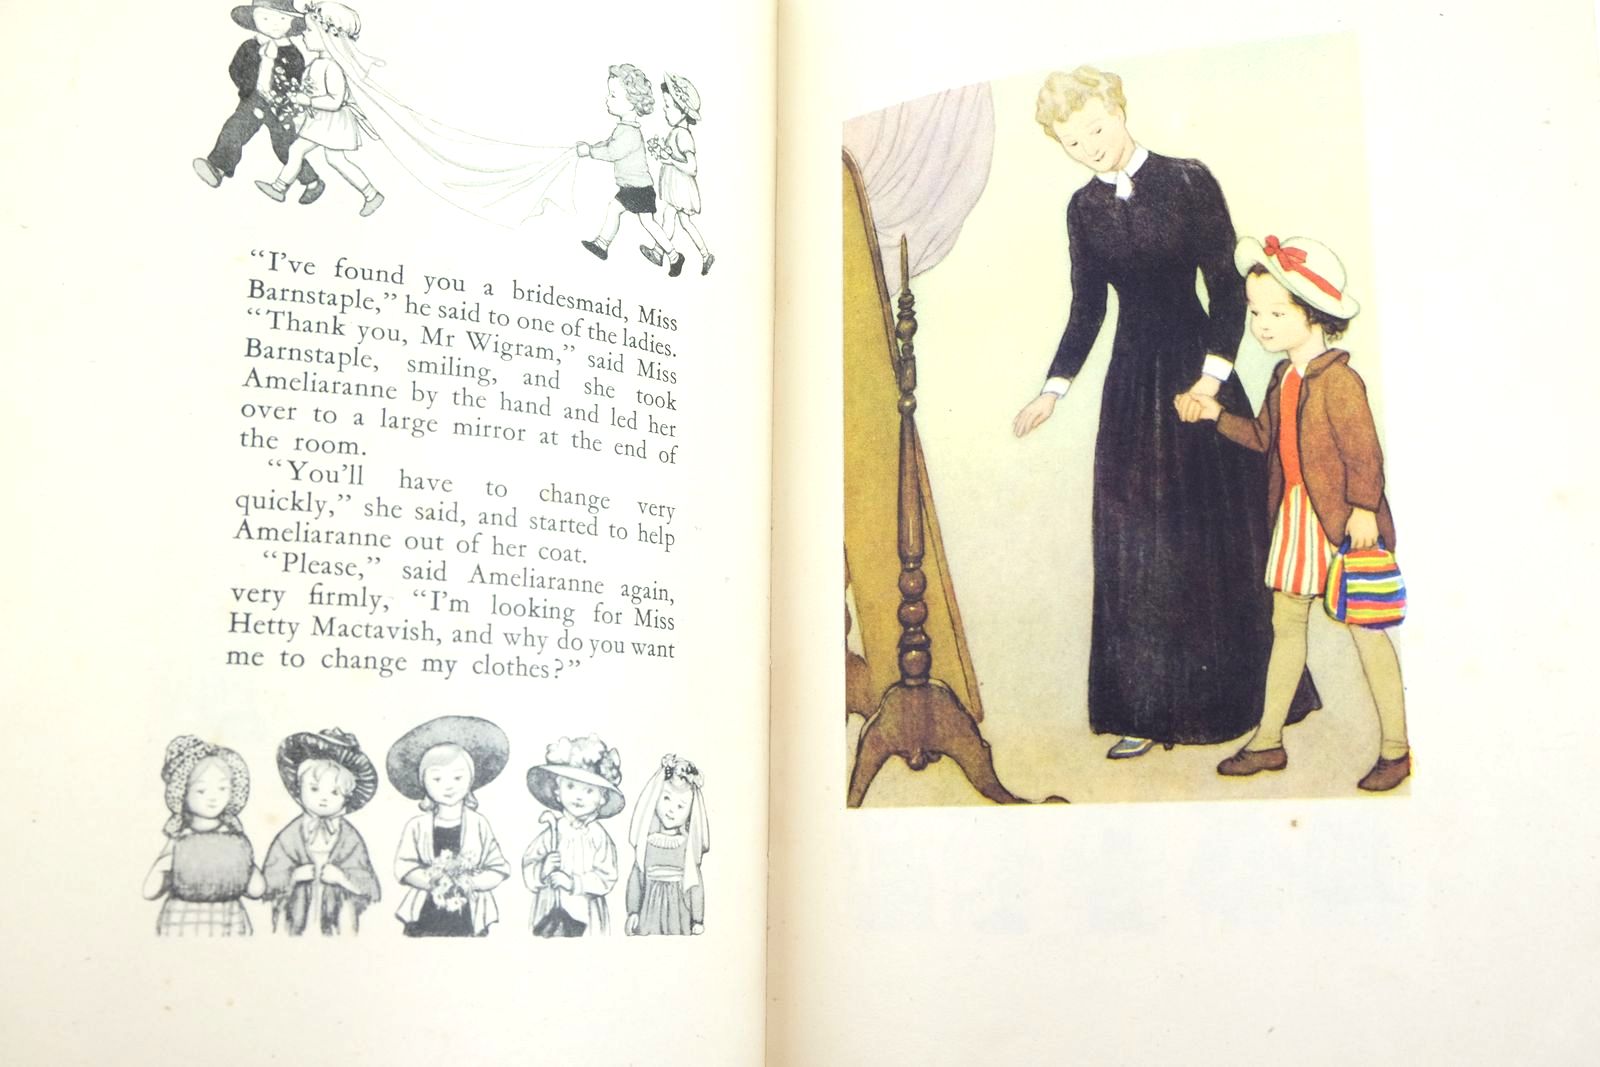 Photo of AMELIARANNE BRIDESMAID written by Morris, Ethelberta illustrated by Pearse, S.B. published by George G. Harrap & Co. Ltd. (STOCK CODE: 2132993)  for sale by Stella & Rose's Books